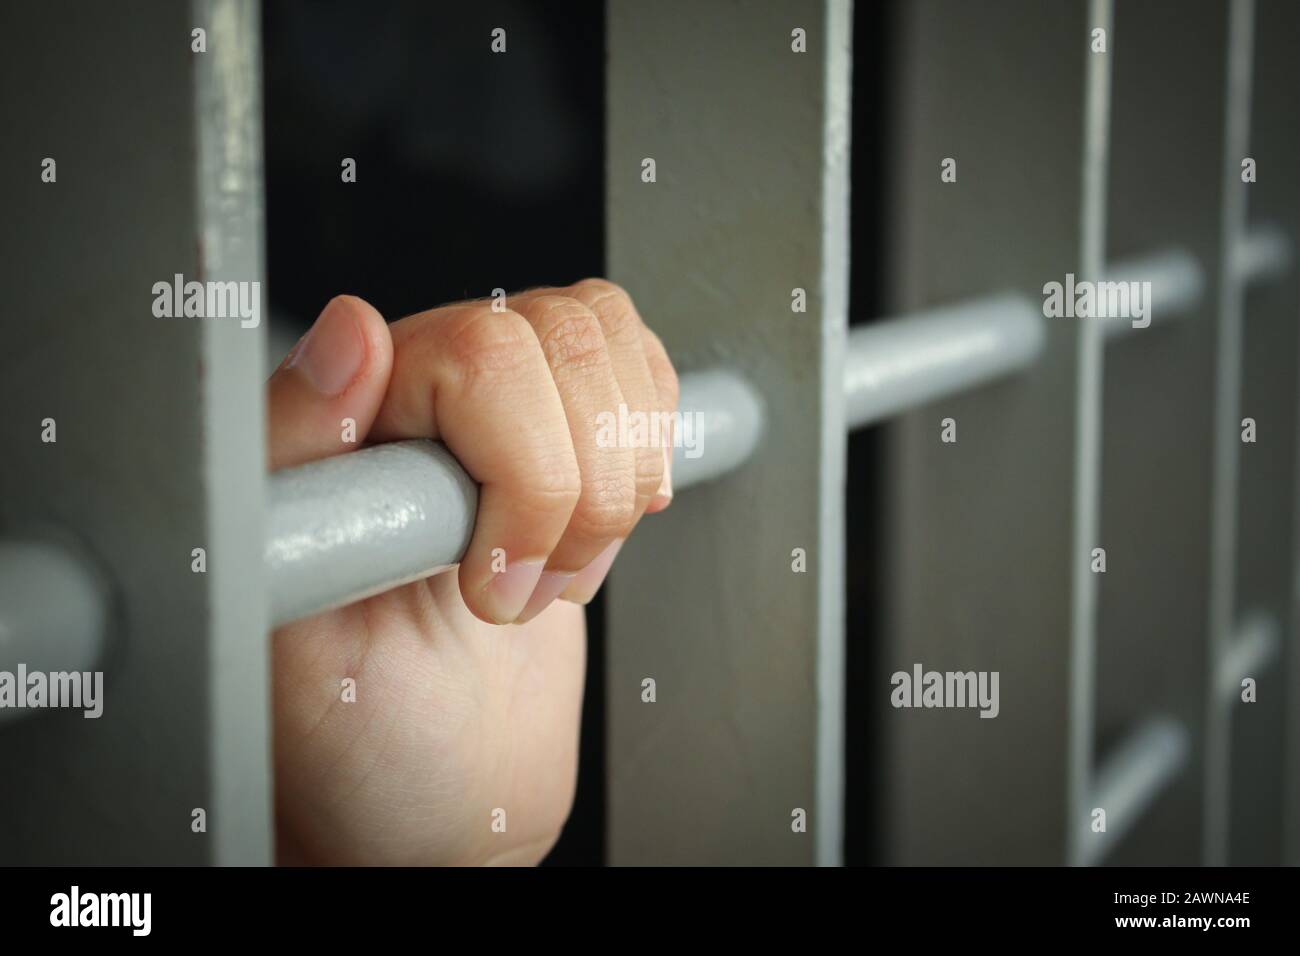 Female's hand holding the bars od a cell in a prison - no freedom concept Stock Photo